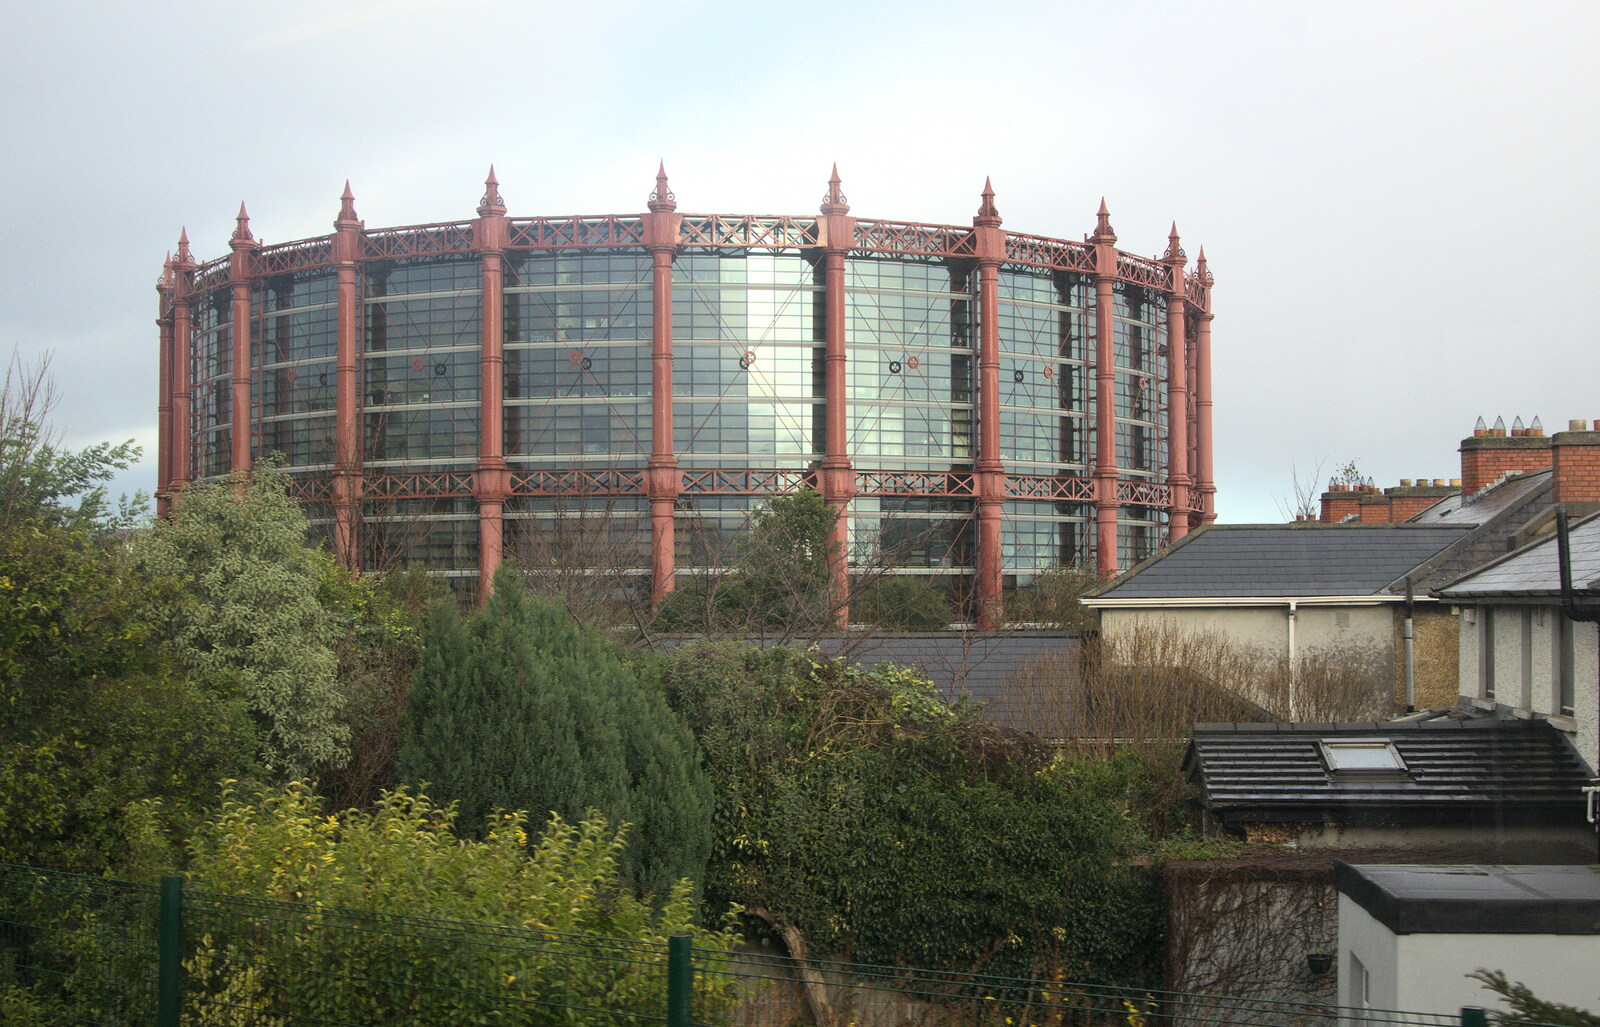 A cool Gasometer conversion near Lansdowne Road from Christmas Eve in Dublin and Blackrock, Ireland - 24th December 2015